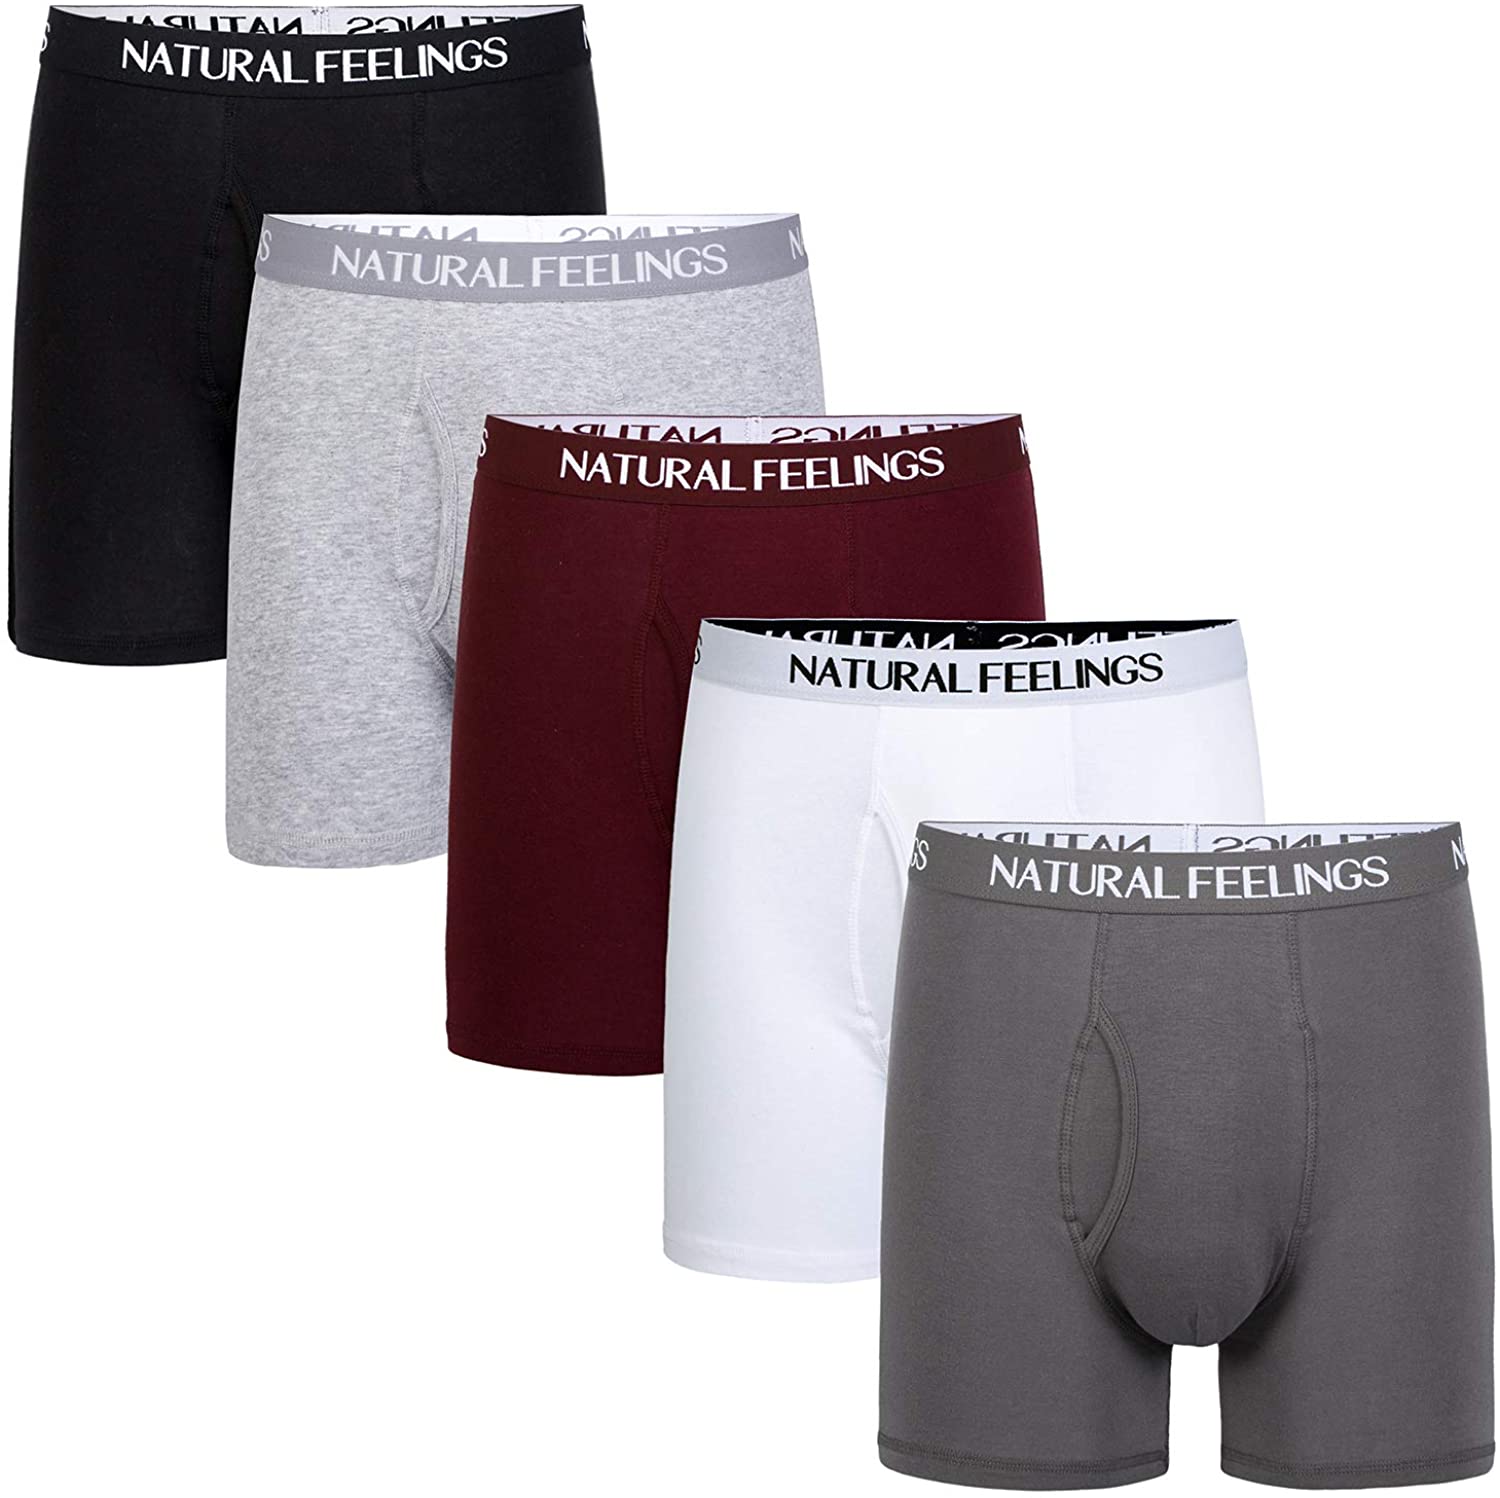 Natural Feelings Mens Underwear Boxer Briefs Men Pack of 5 Soft Cotton Open  Fly